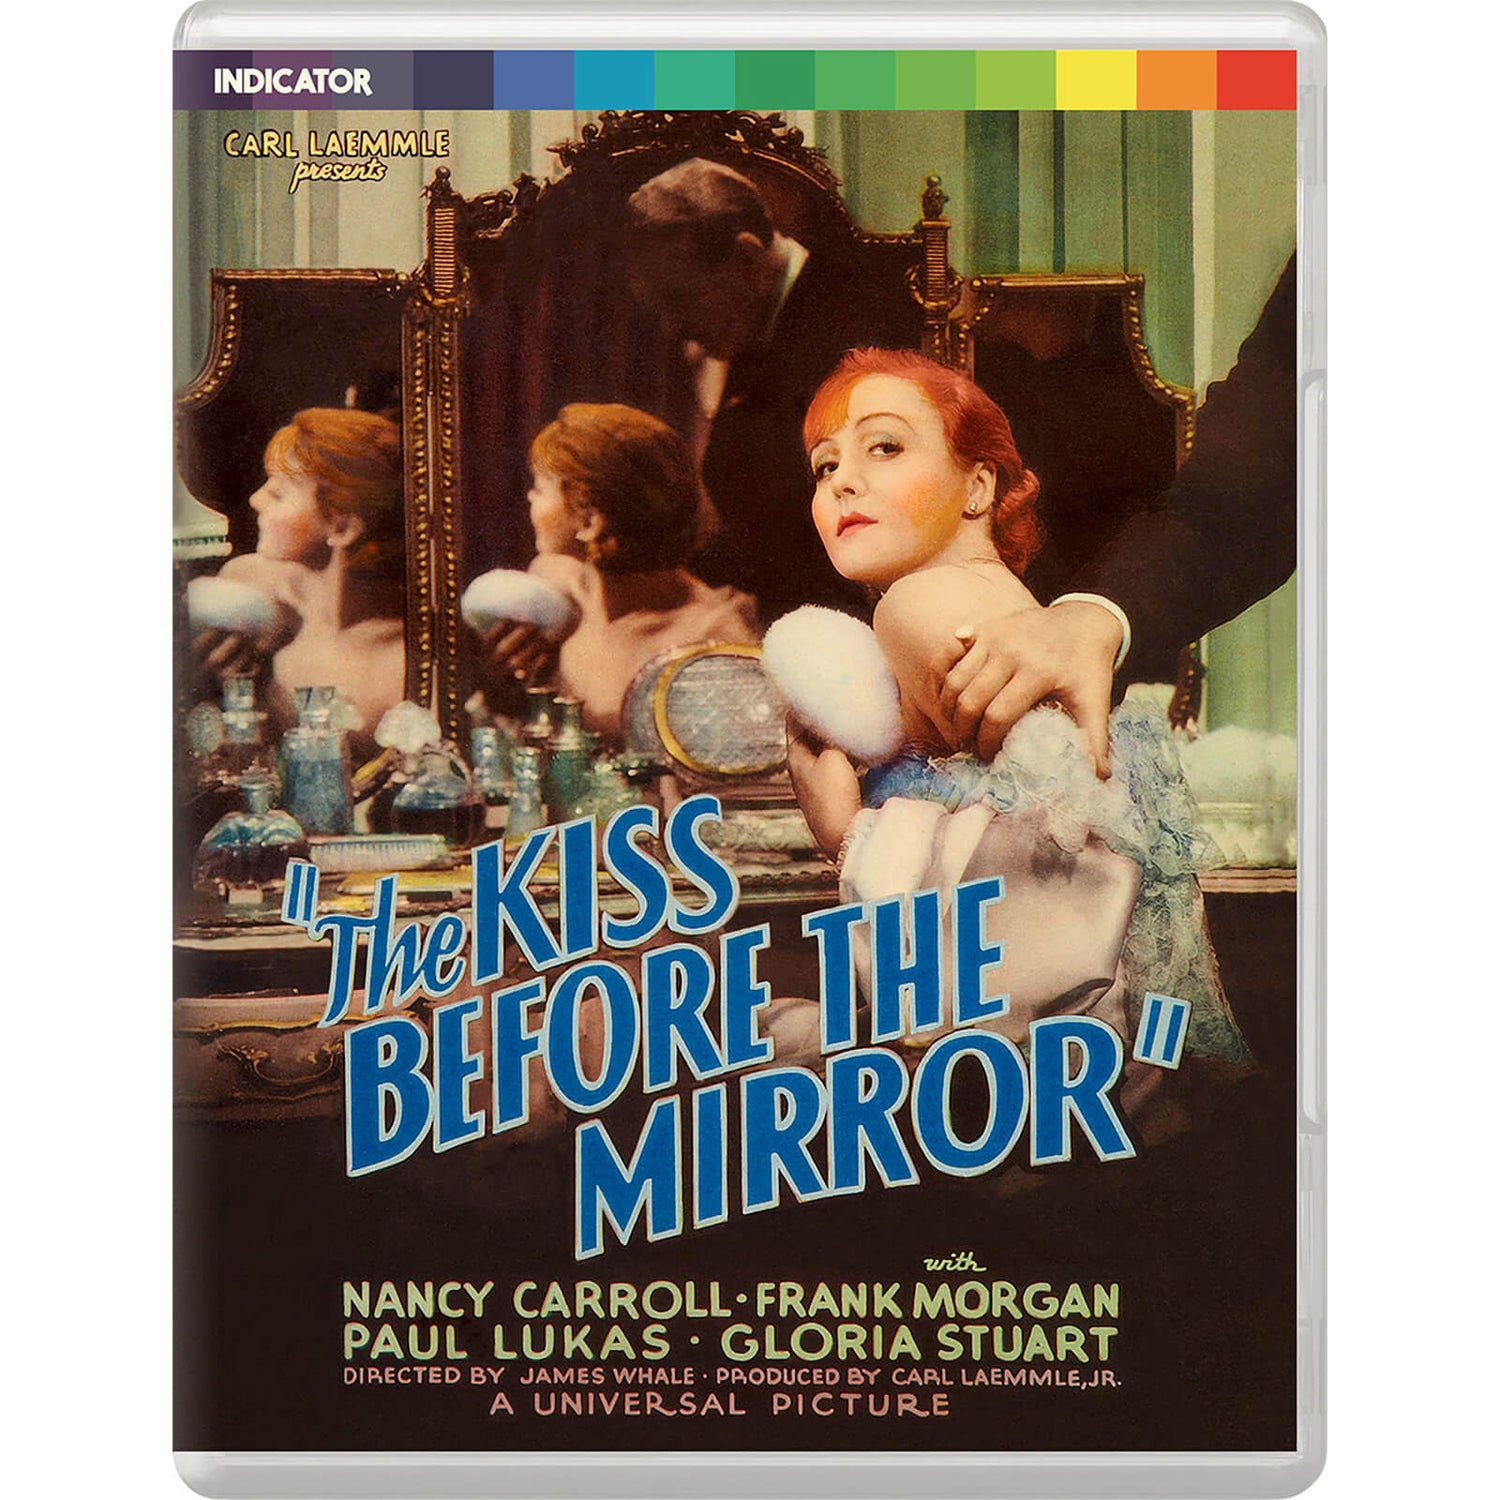 The Kiss Before the Mirror (Limited Edition)